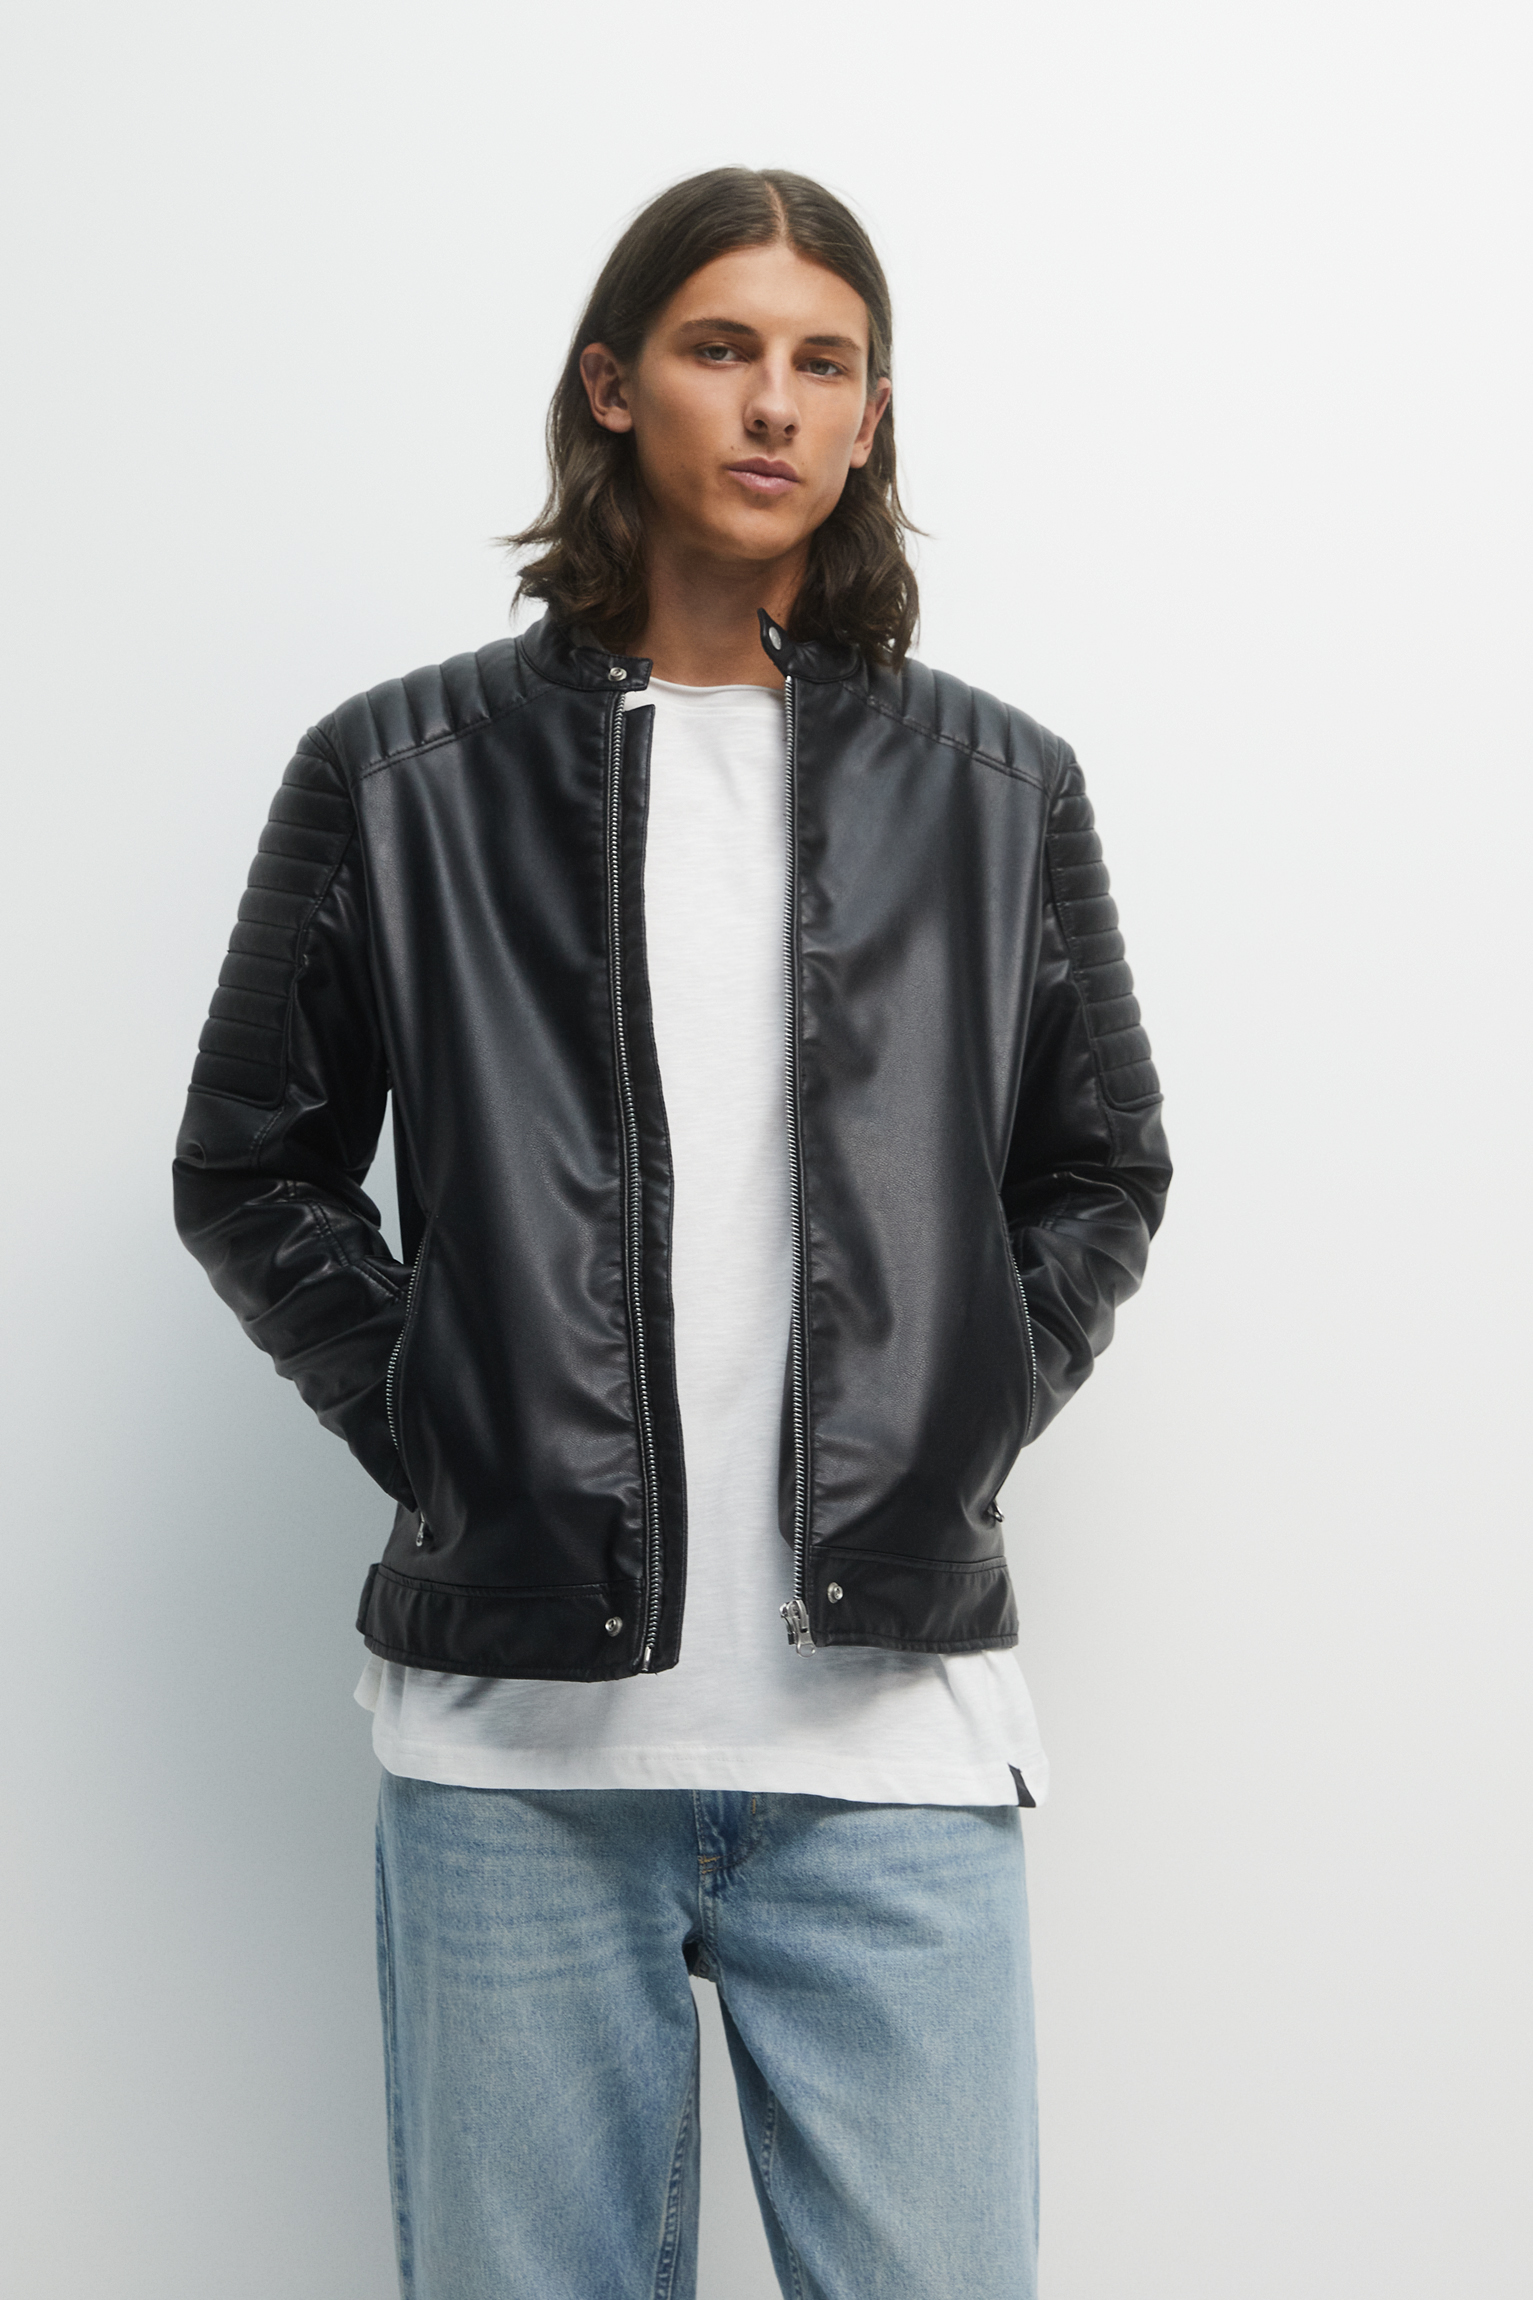 Know the difference between real, fake leather jackets